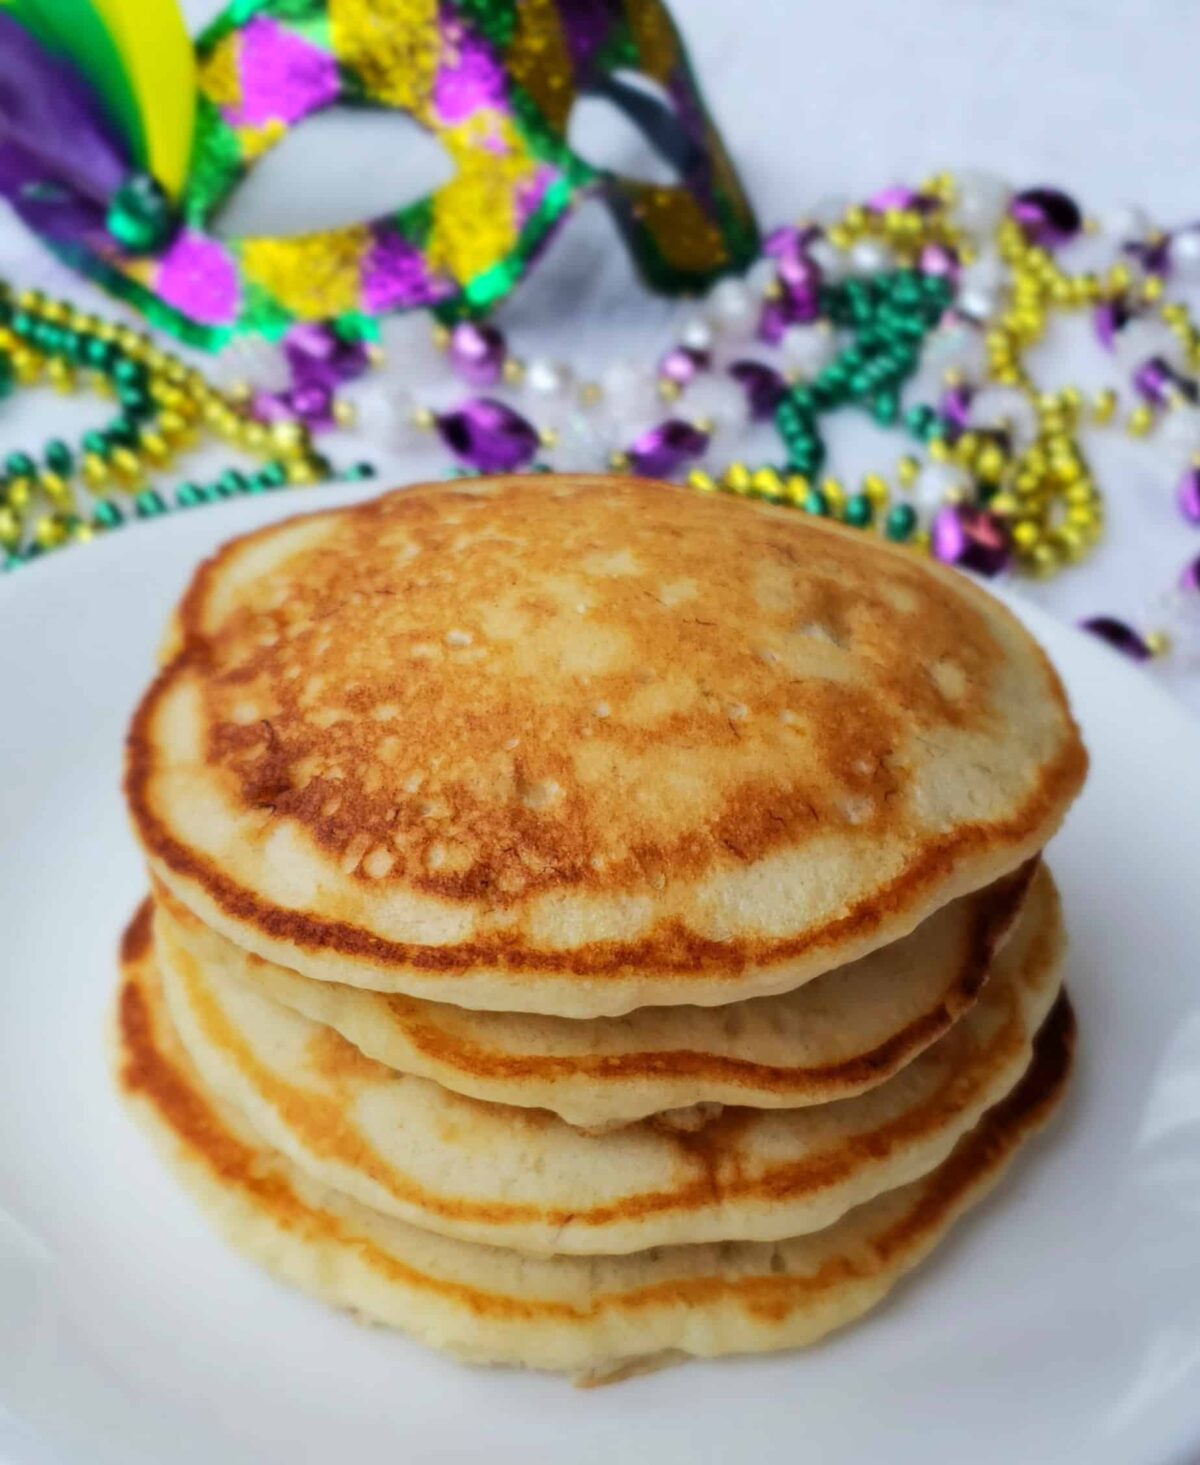  A stack of shortcut banana pancakes before drizzling icing and sprinkles on top. Mardi gras beads in back ground